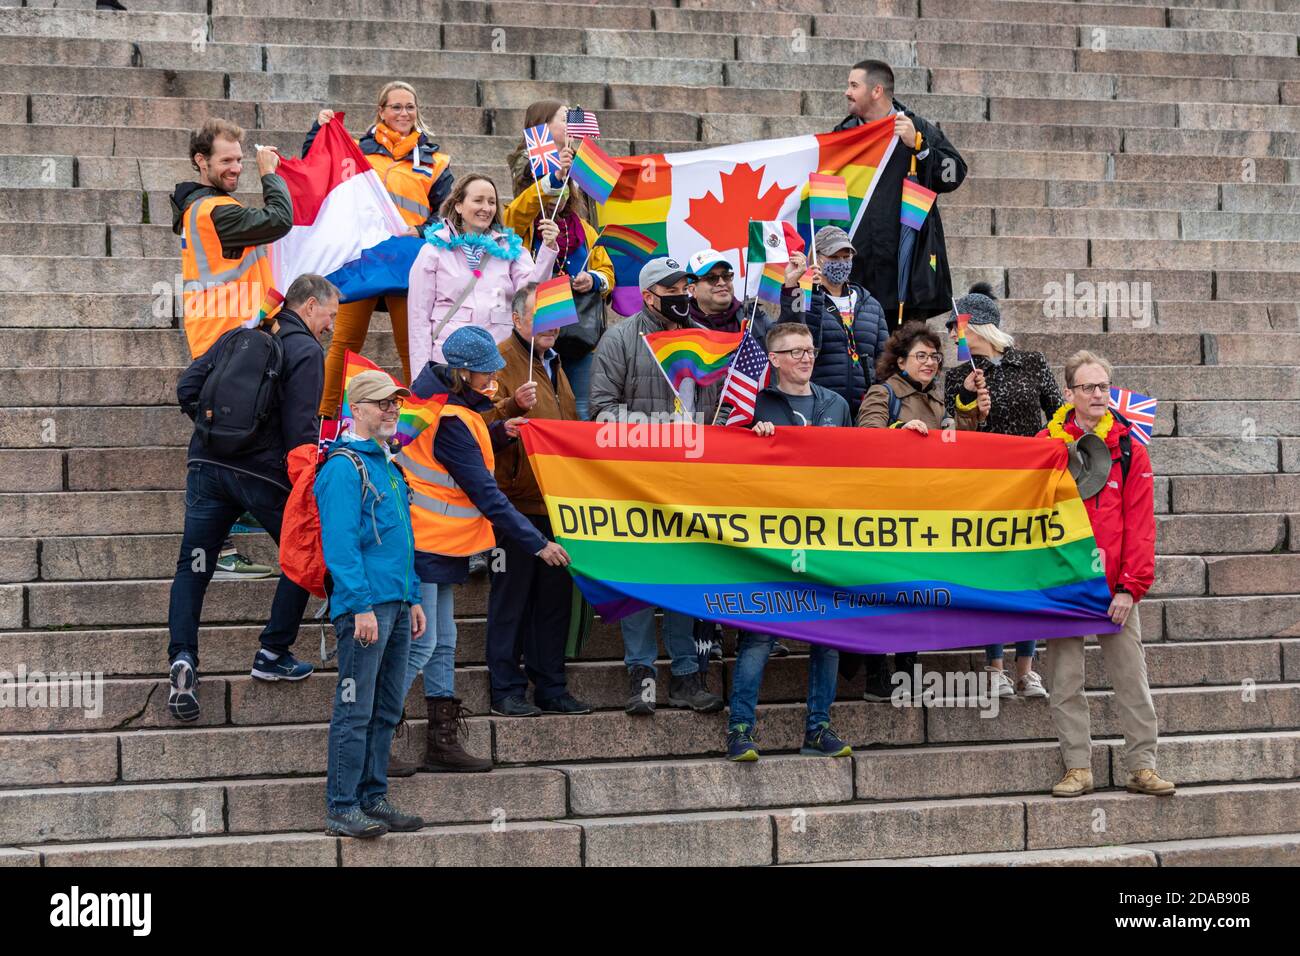 Diplomats for LGBT+ rights during Helsinki Pride 2020 on Helsinki Cathedral steps by Senate Square Stock Photo